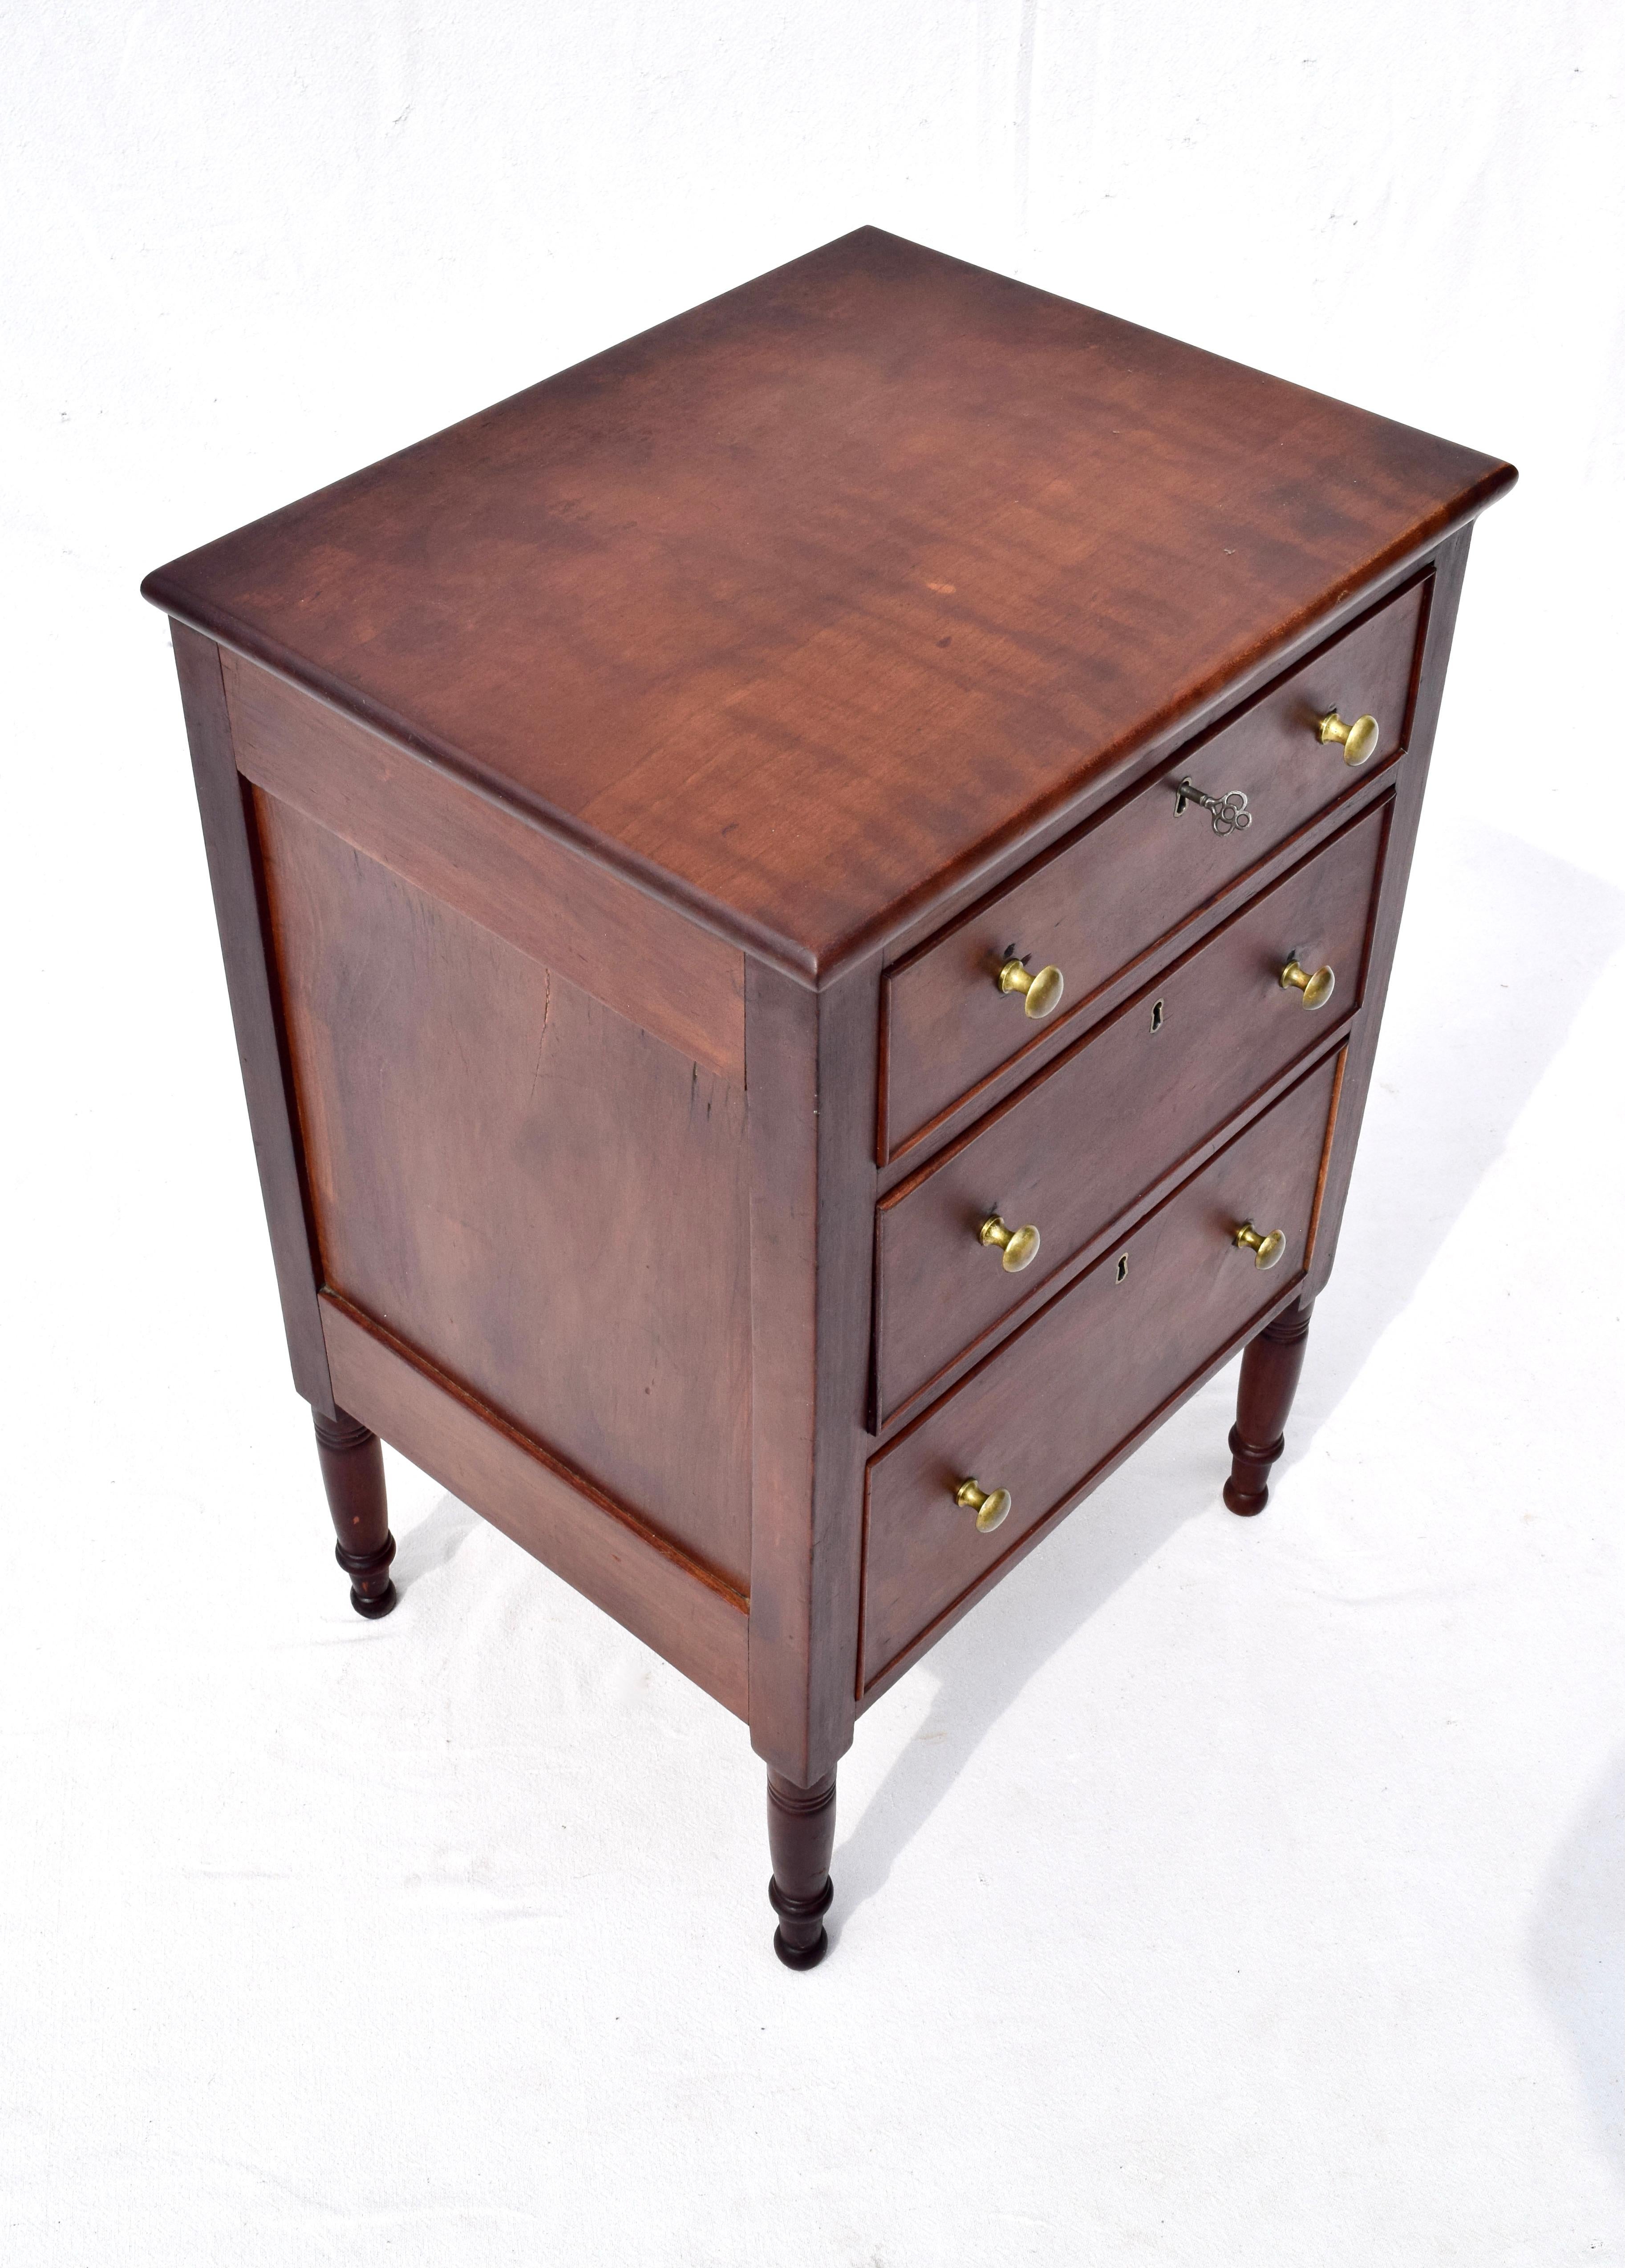 19th Century Early 19th C. Federal Period Mahogany Chest of Drawers